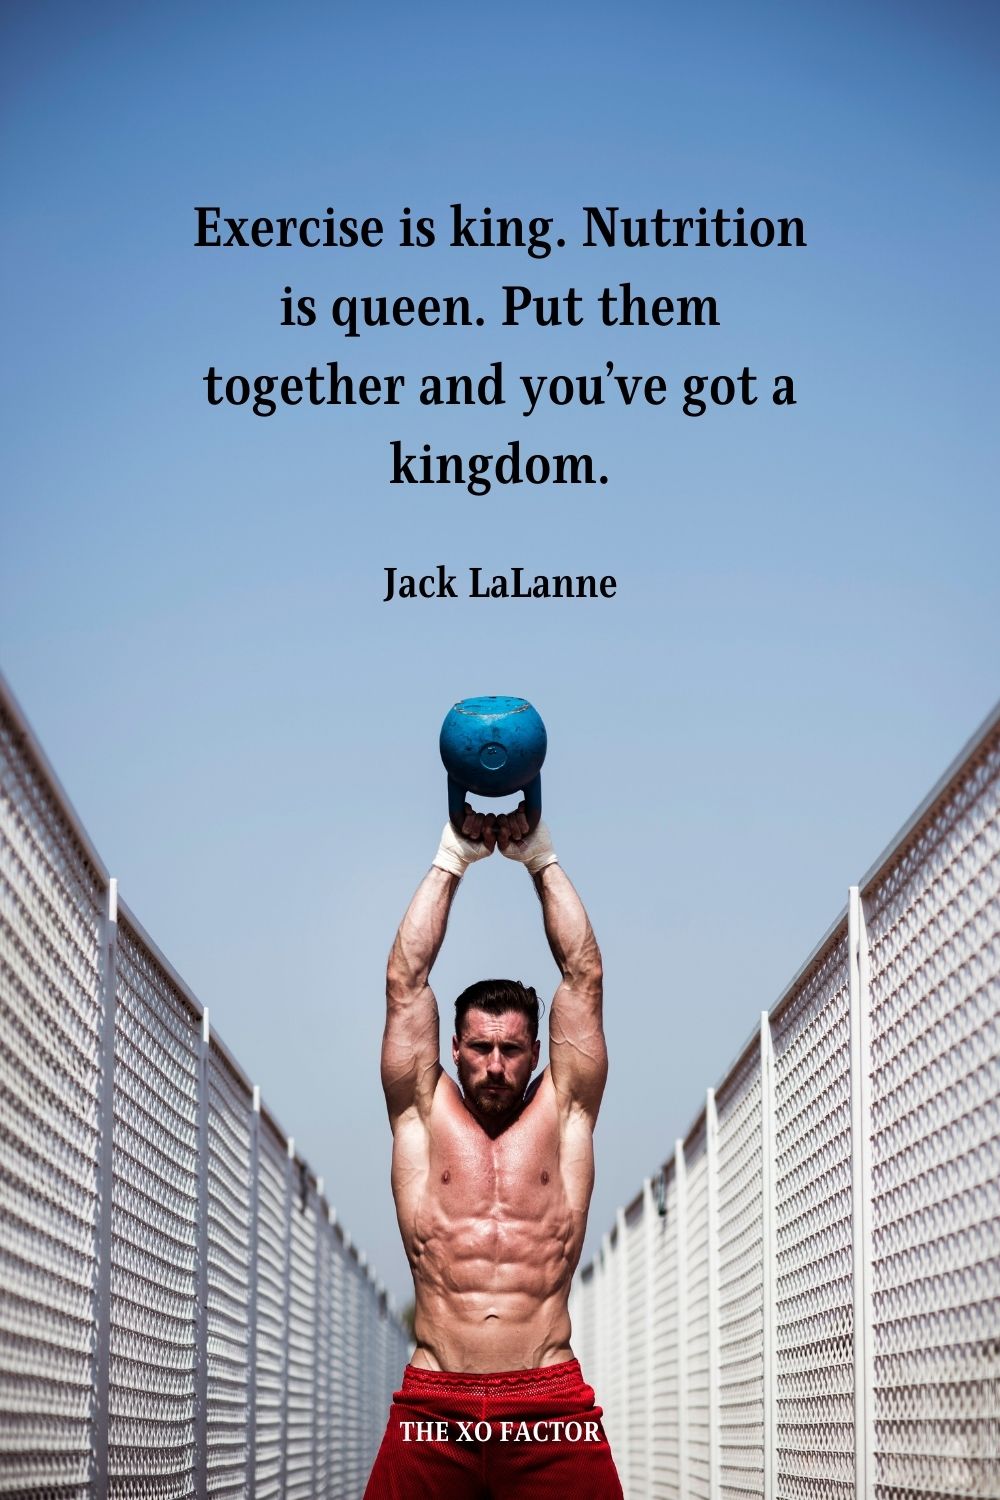 Exercise is king. Nutrition is queen. Put them together and you’ve got a kingdom. Jack LaLanne